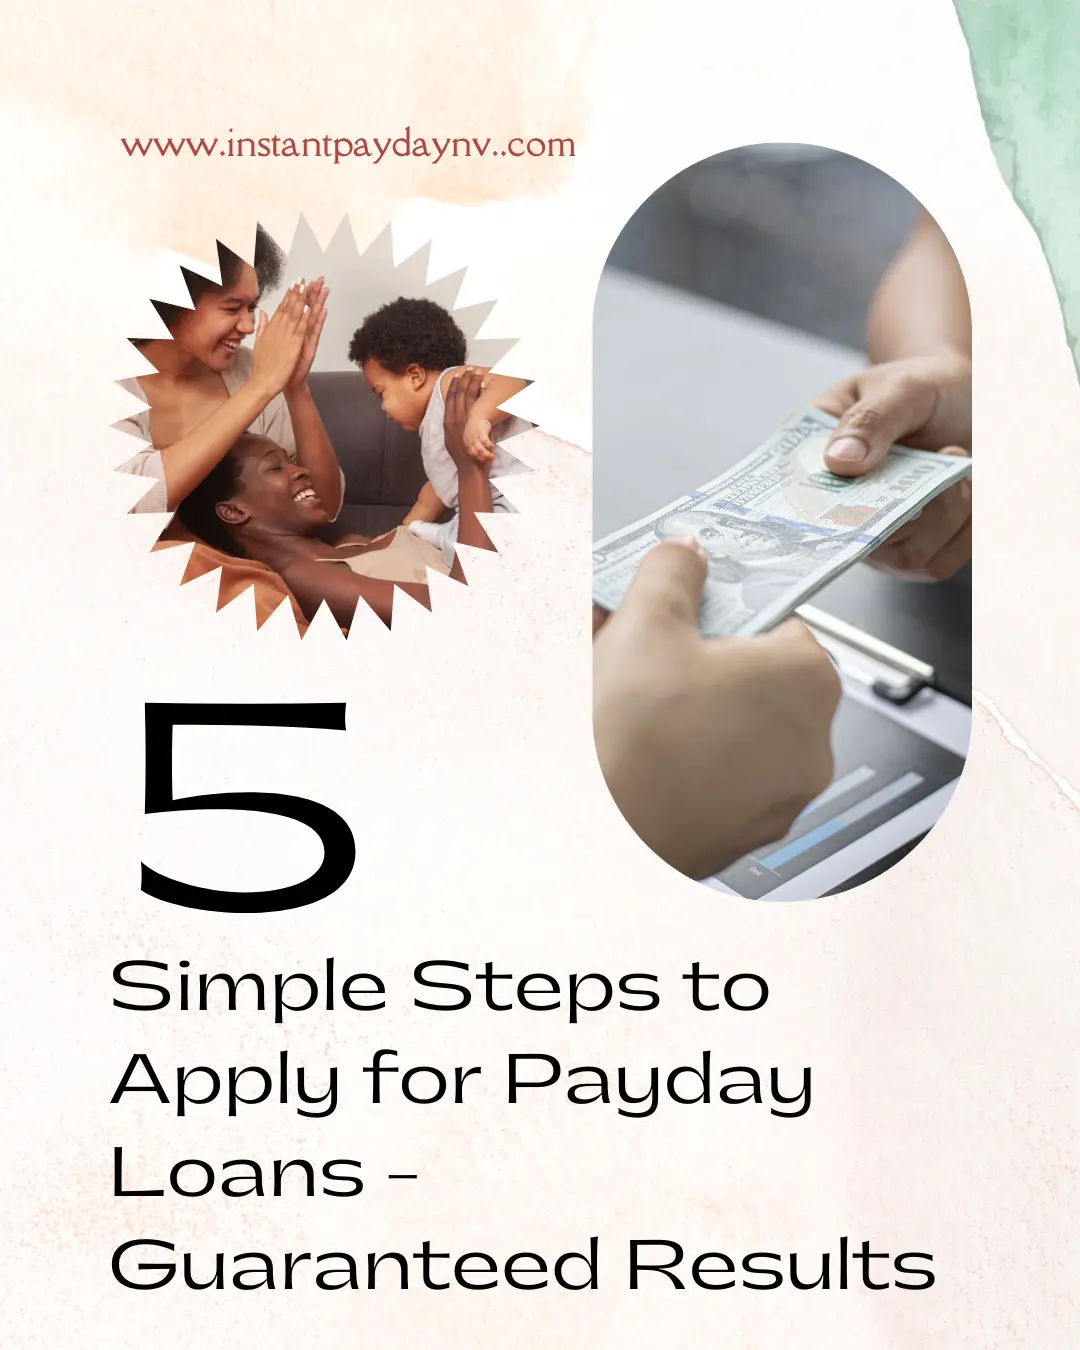 5 Simple Steps to Apply for Payday Loans